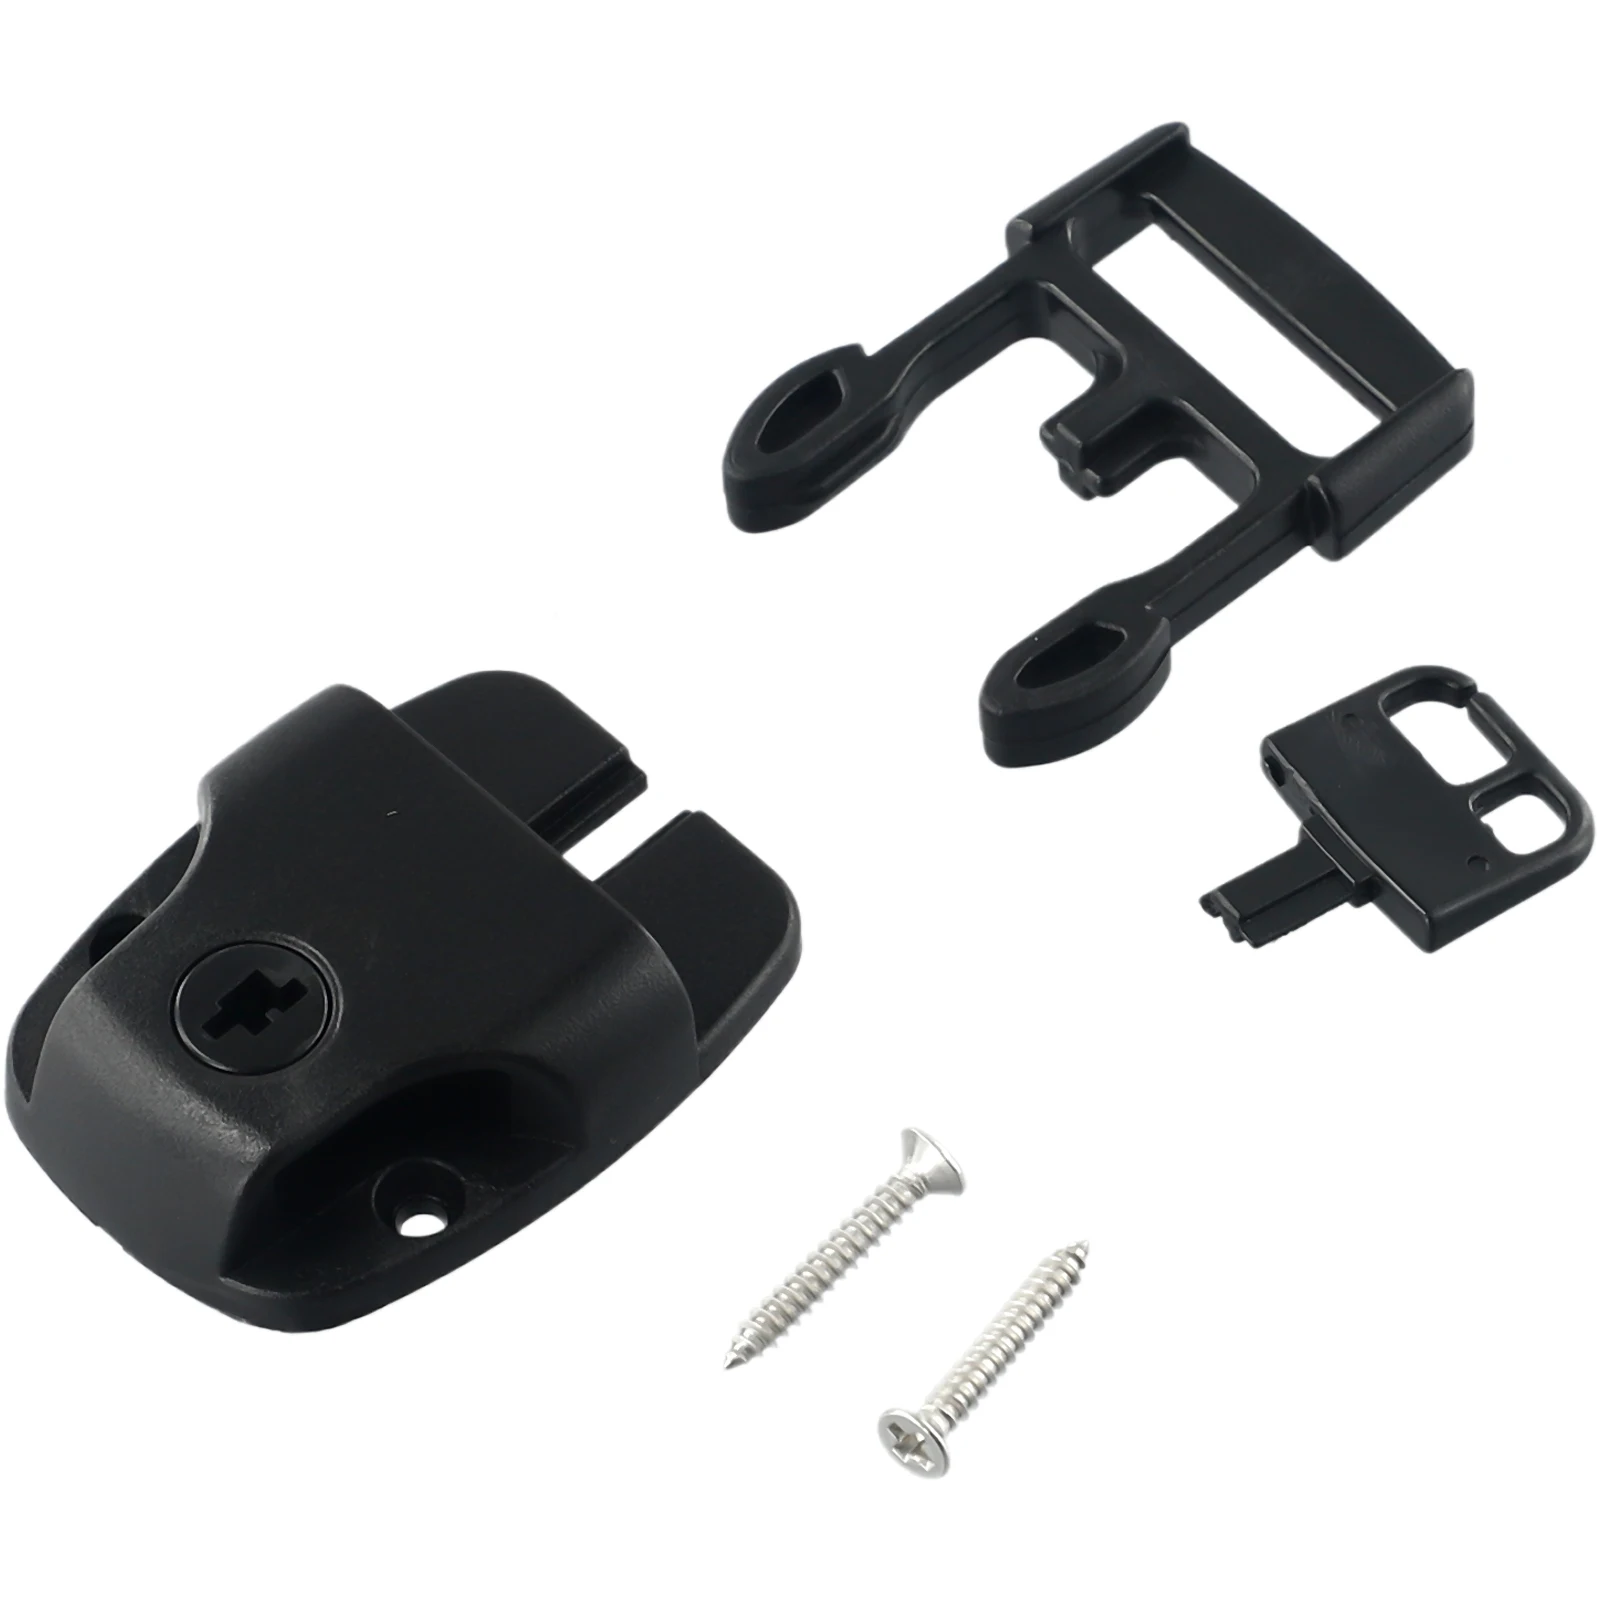 

Locks Hot Tub Latch Spa Broken Clip Clip Lock Cover Hot Tub Latch Repair Kit Replacement For 1inch Wide Straps